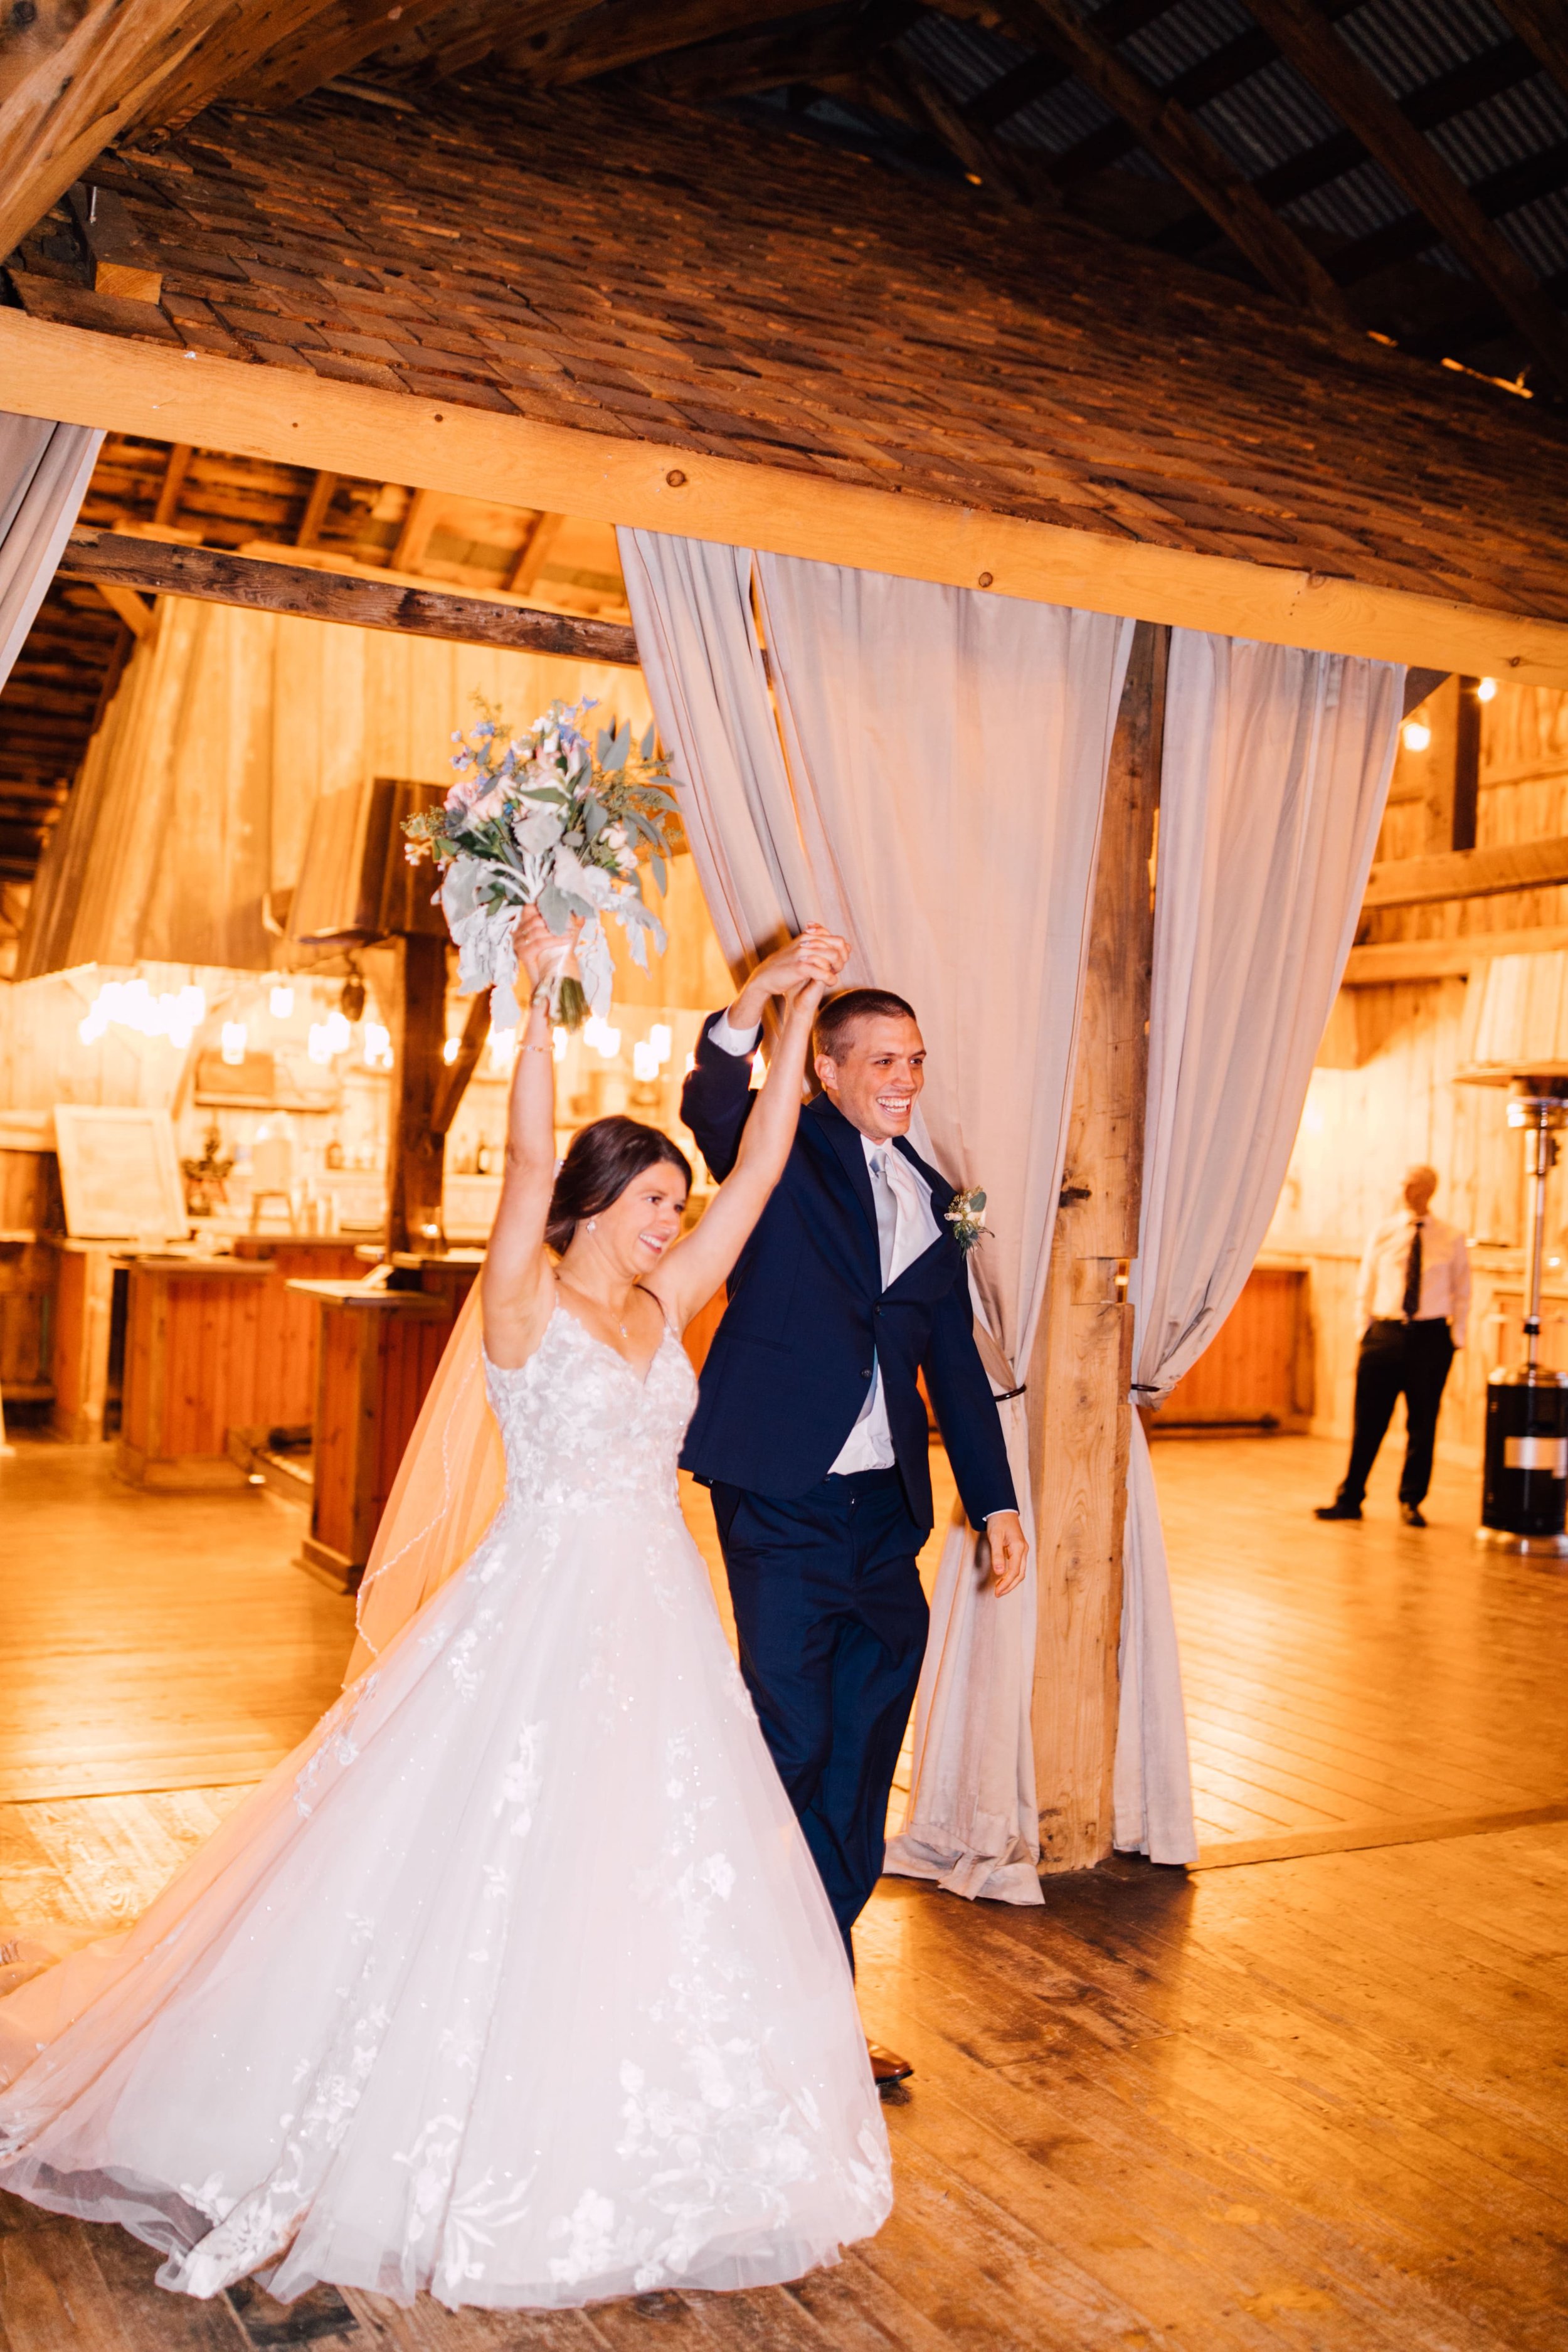  the bride and groom walk into their reception with arms outstretched at their elegant barn wedding 